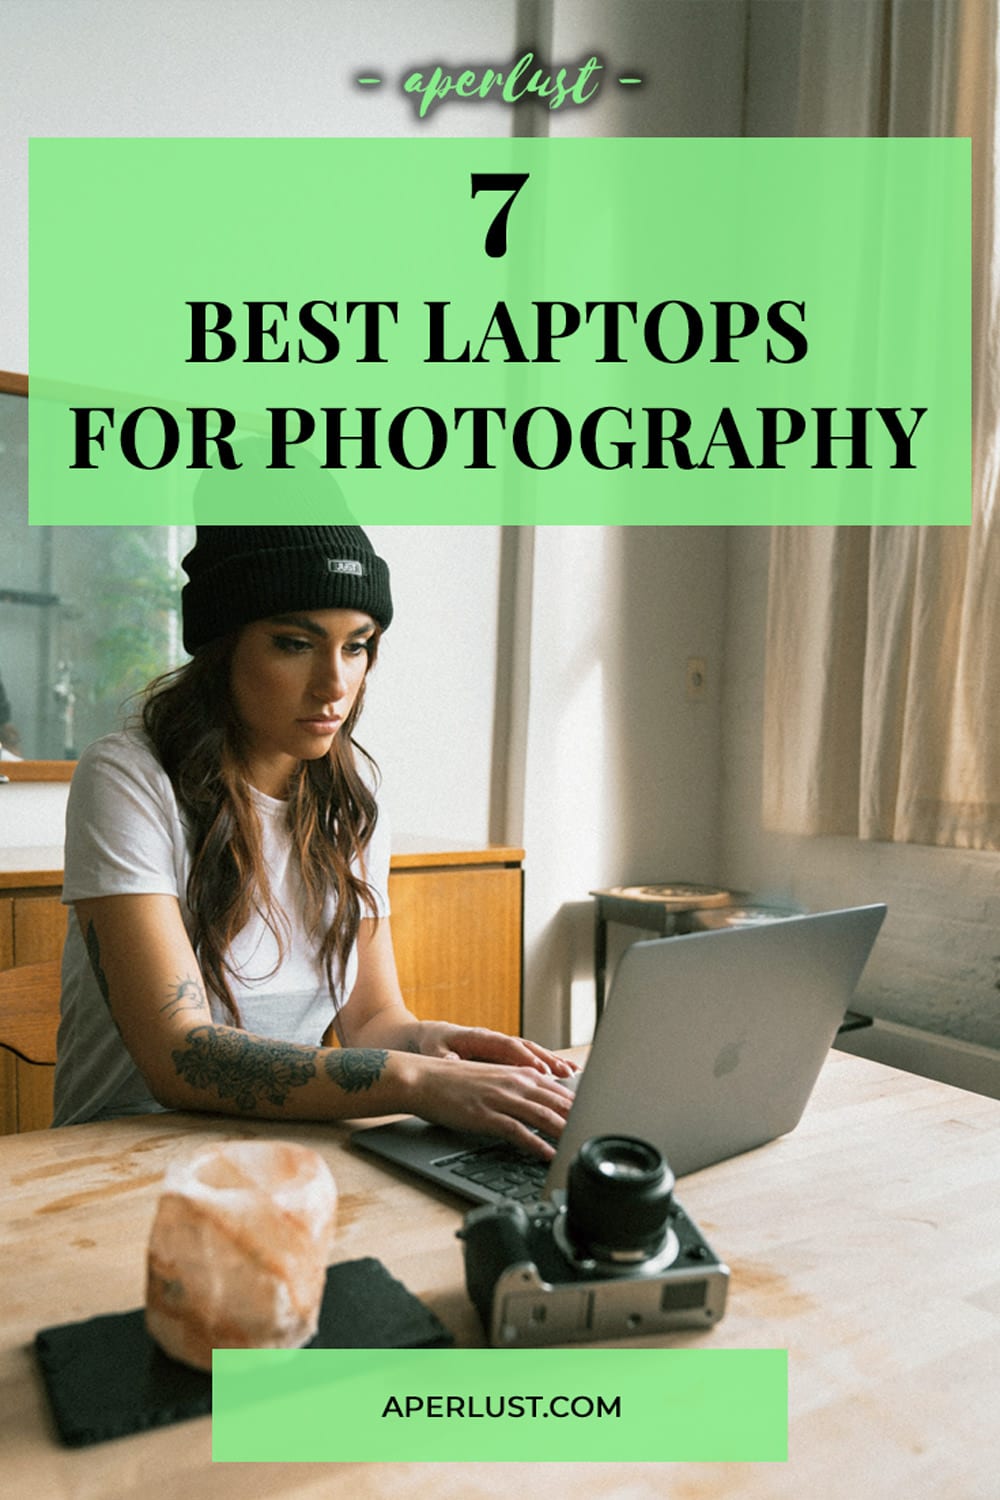 7 best laptops for Lightroom, Photoshop, and Photography